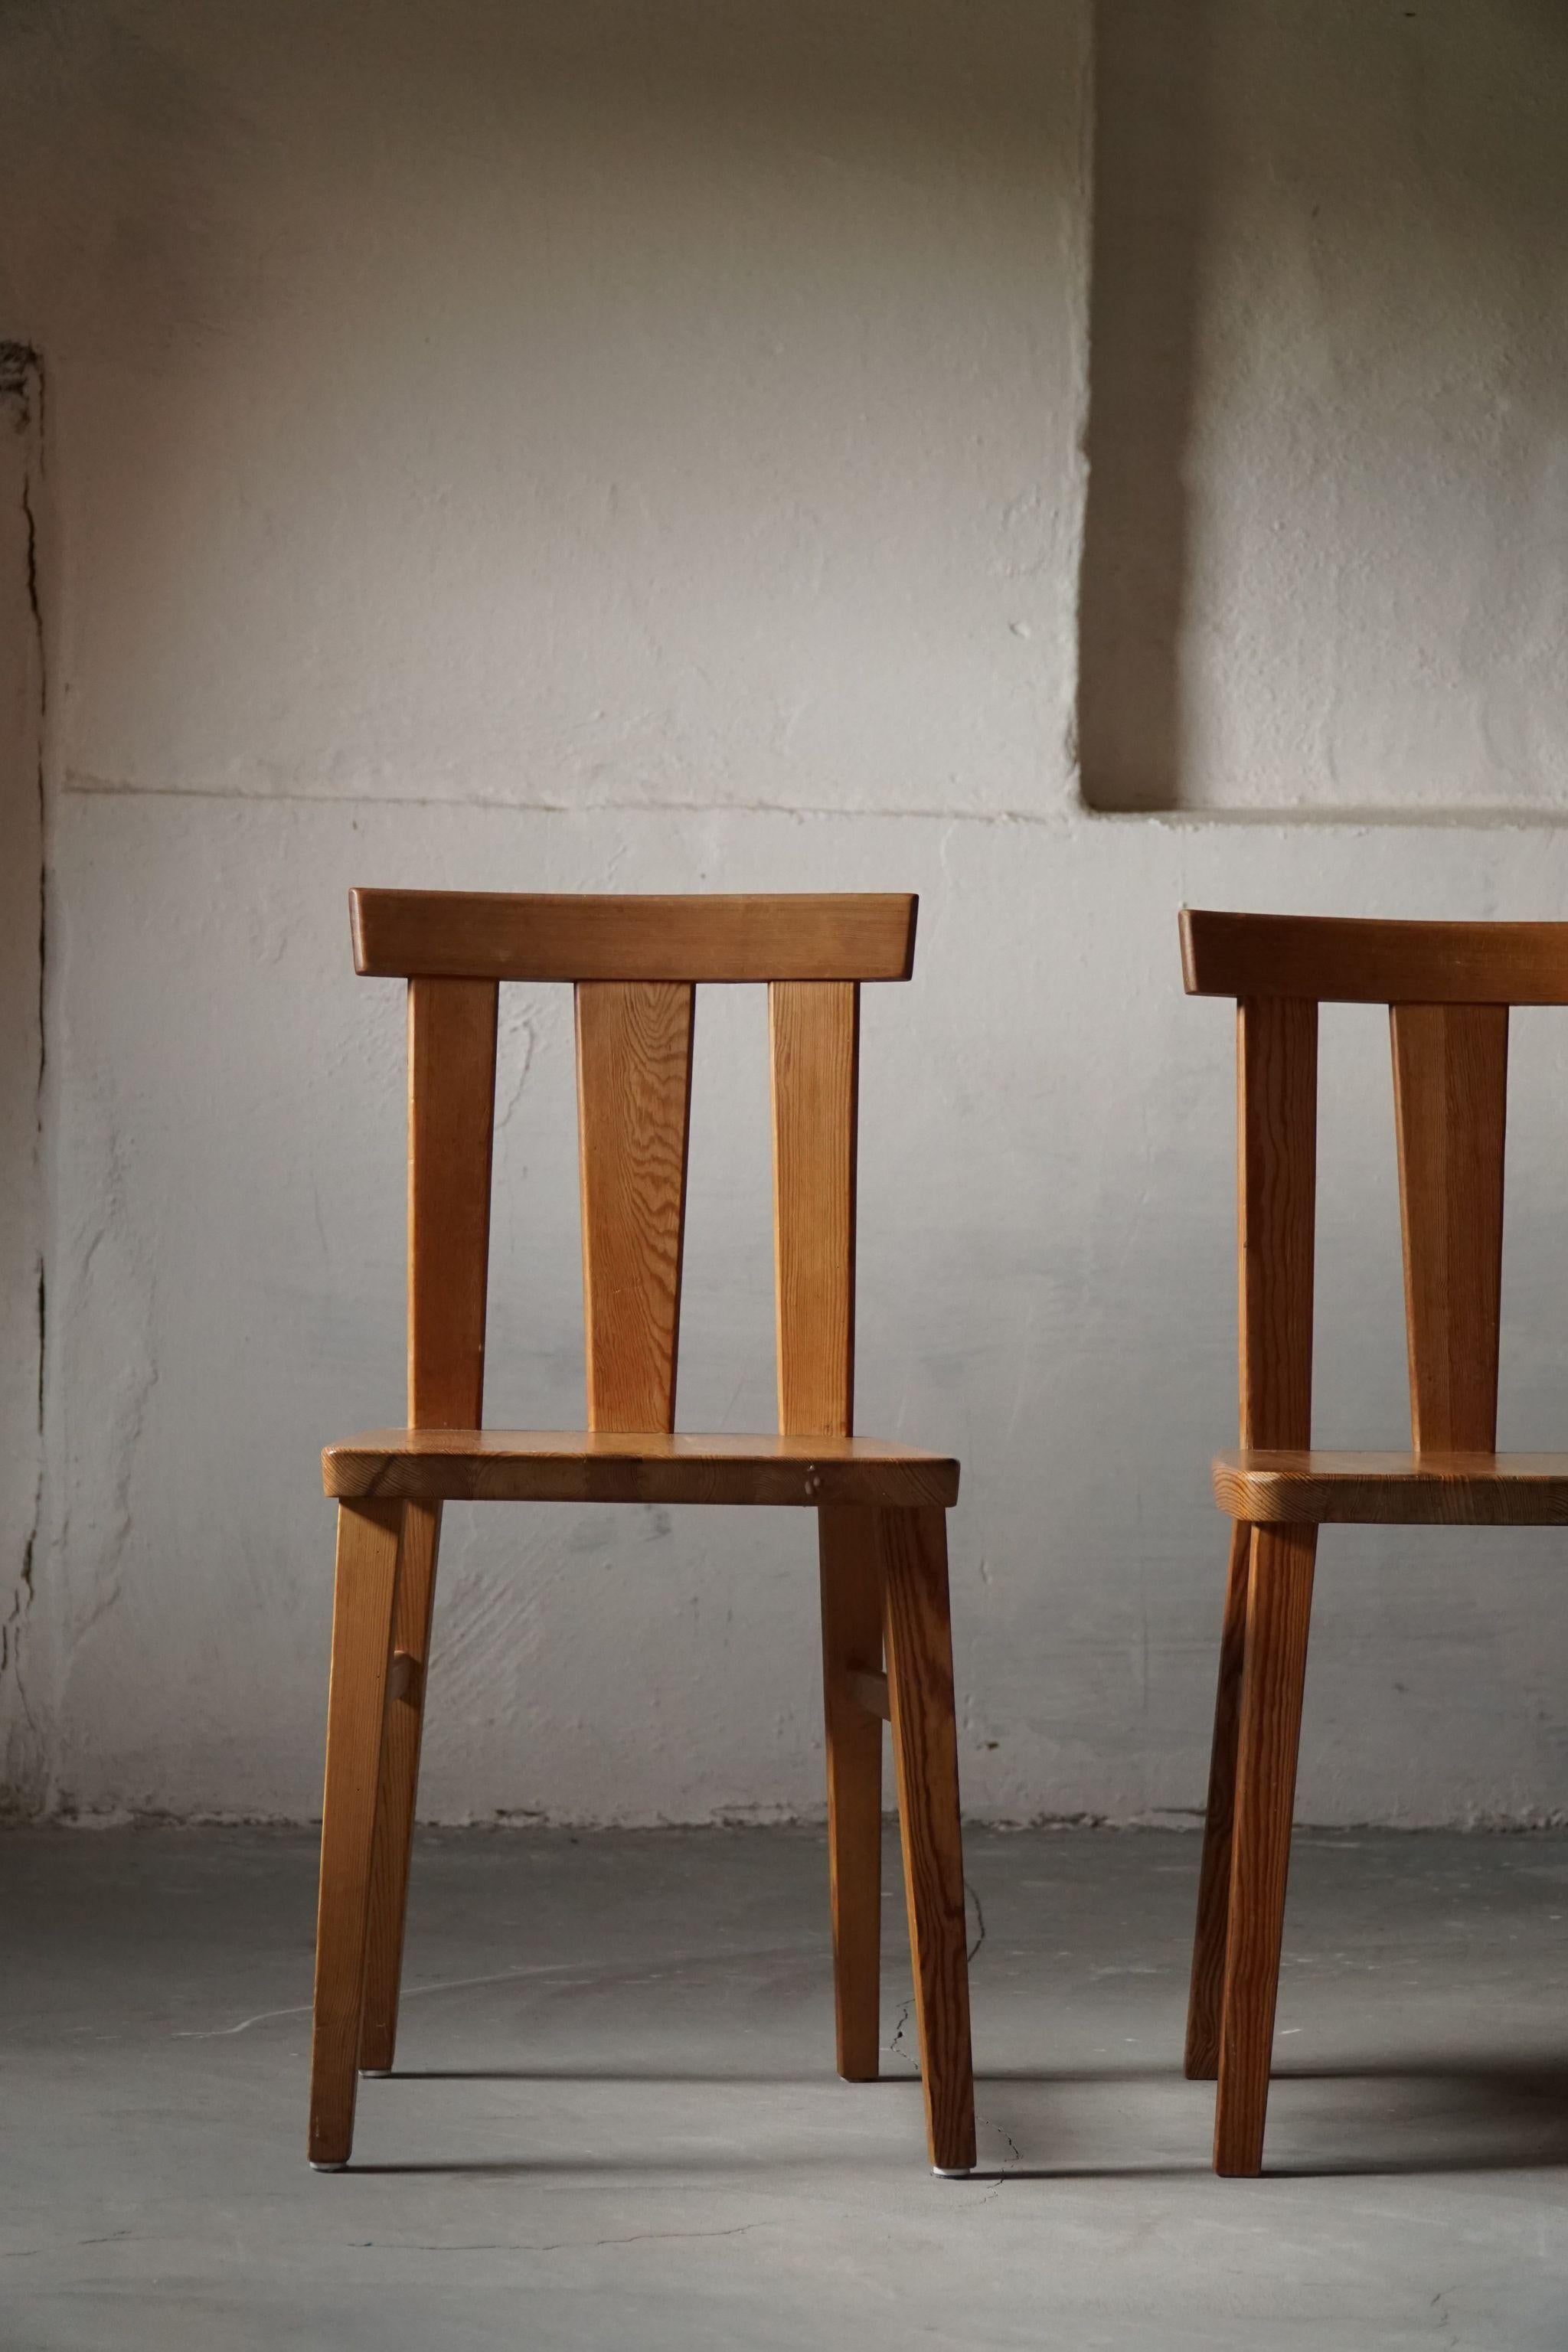 Set of 4 Swedish Modern Chairs in Solid Pine, Axel Einar Hjorth Style, 1930s For Sale 9